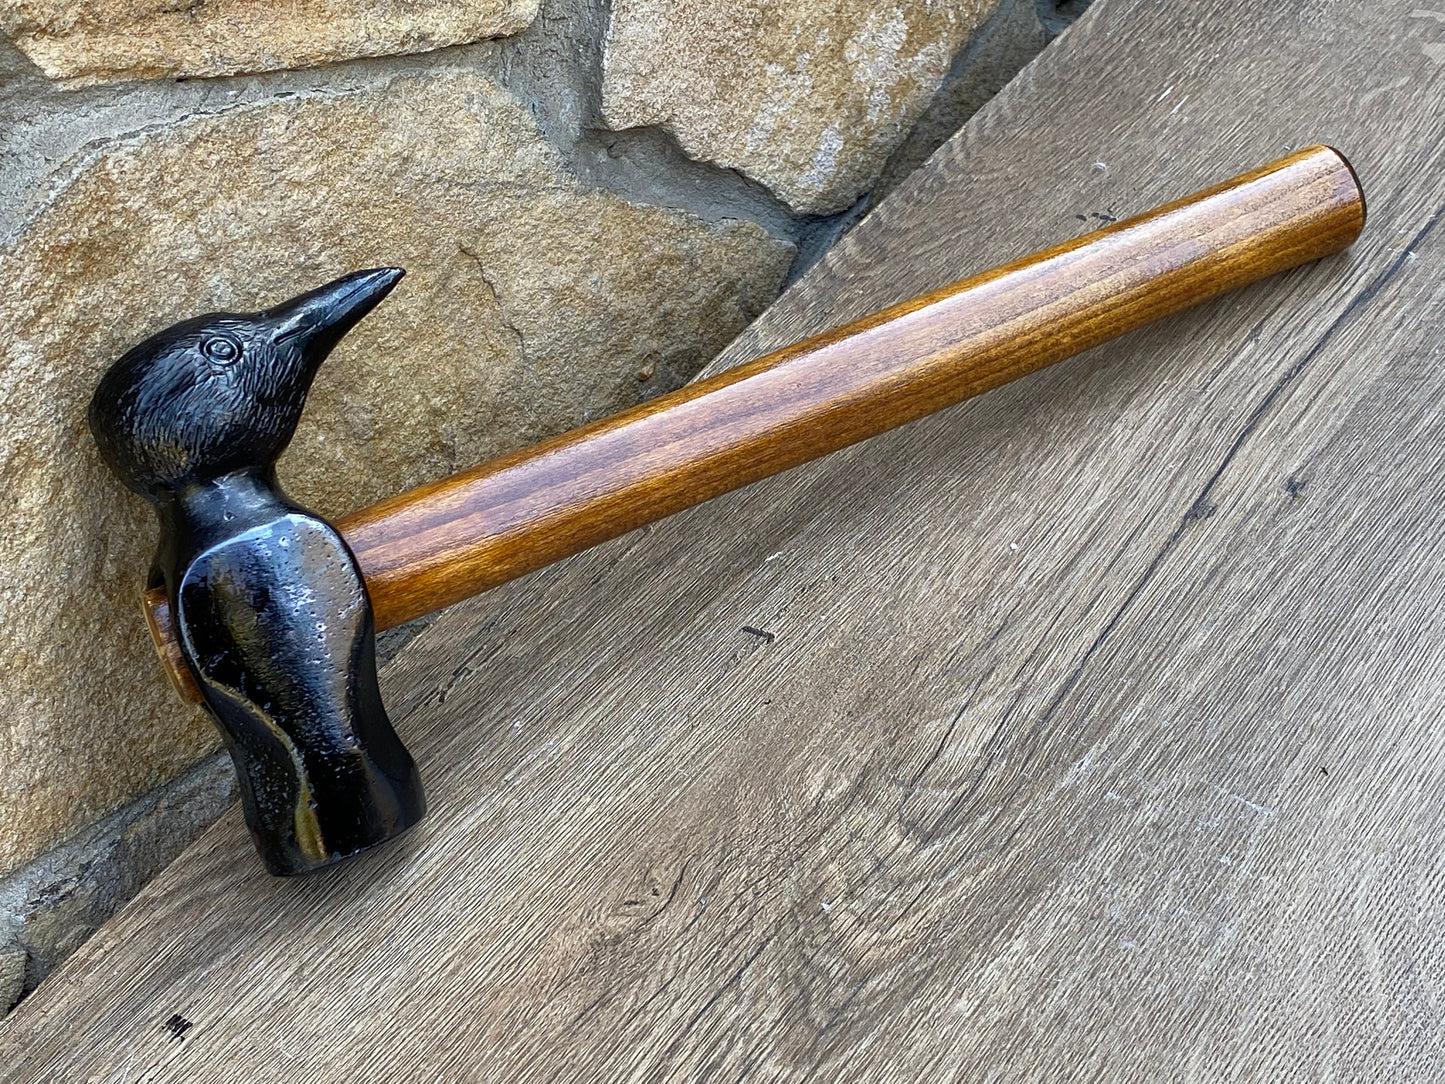 Hammer, raven, crow, gift for dad, Fathers Day, hand crafted hammer, dad, birthday, Christmas, anniversary, gift for men, tools, bird decor